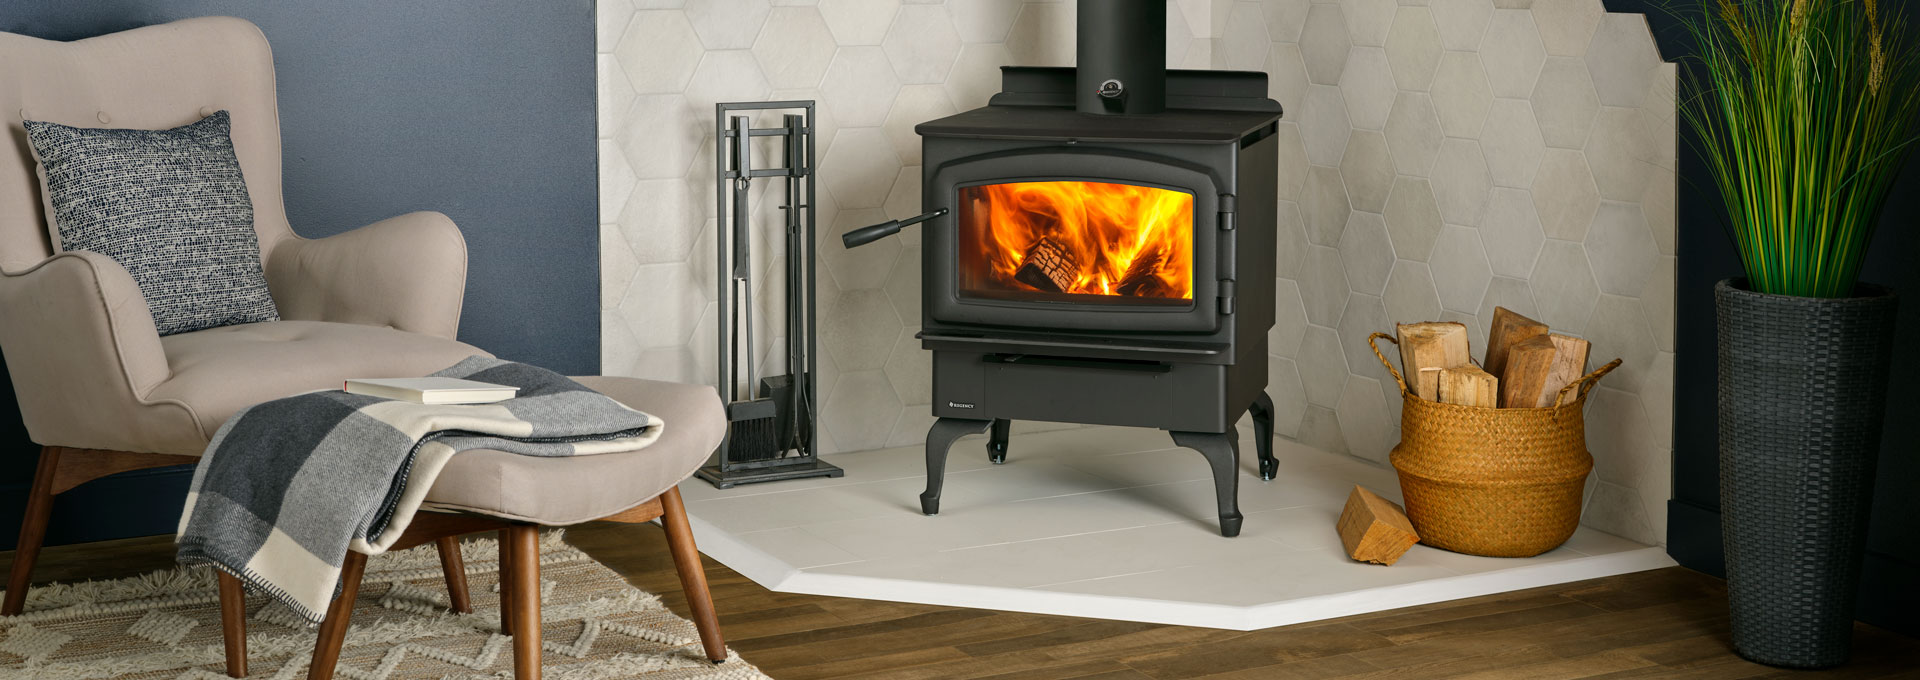 F2500 Hybrid Catalytic Wood Stoves  High-Efficiency Wood Stoves by Regency